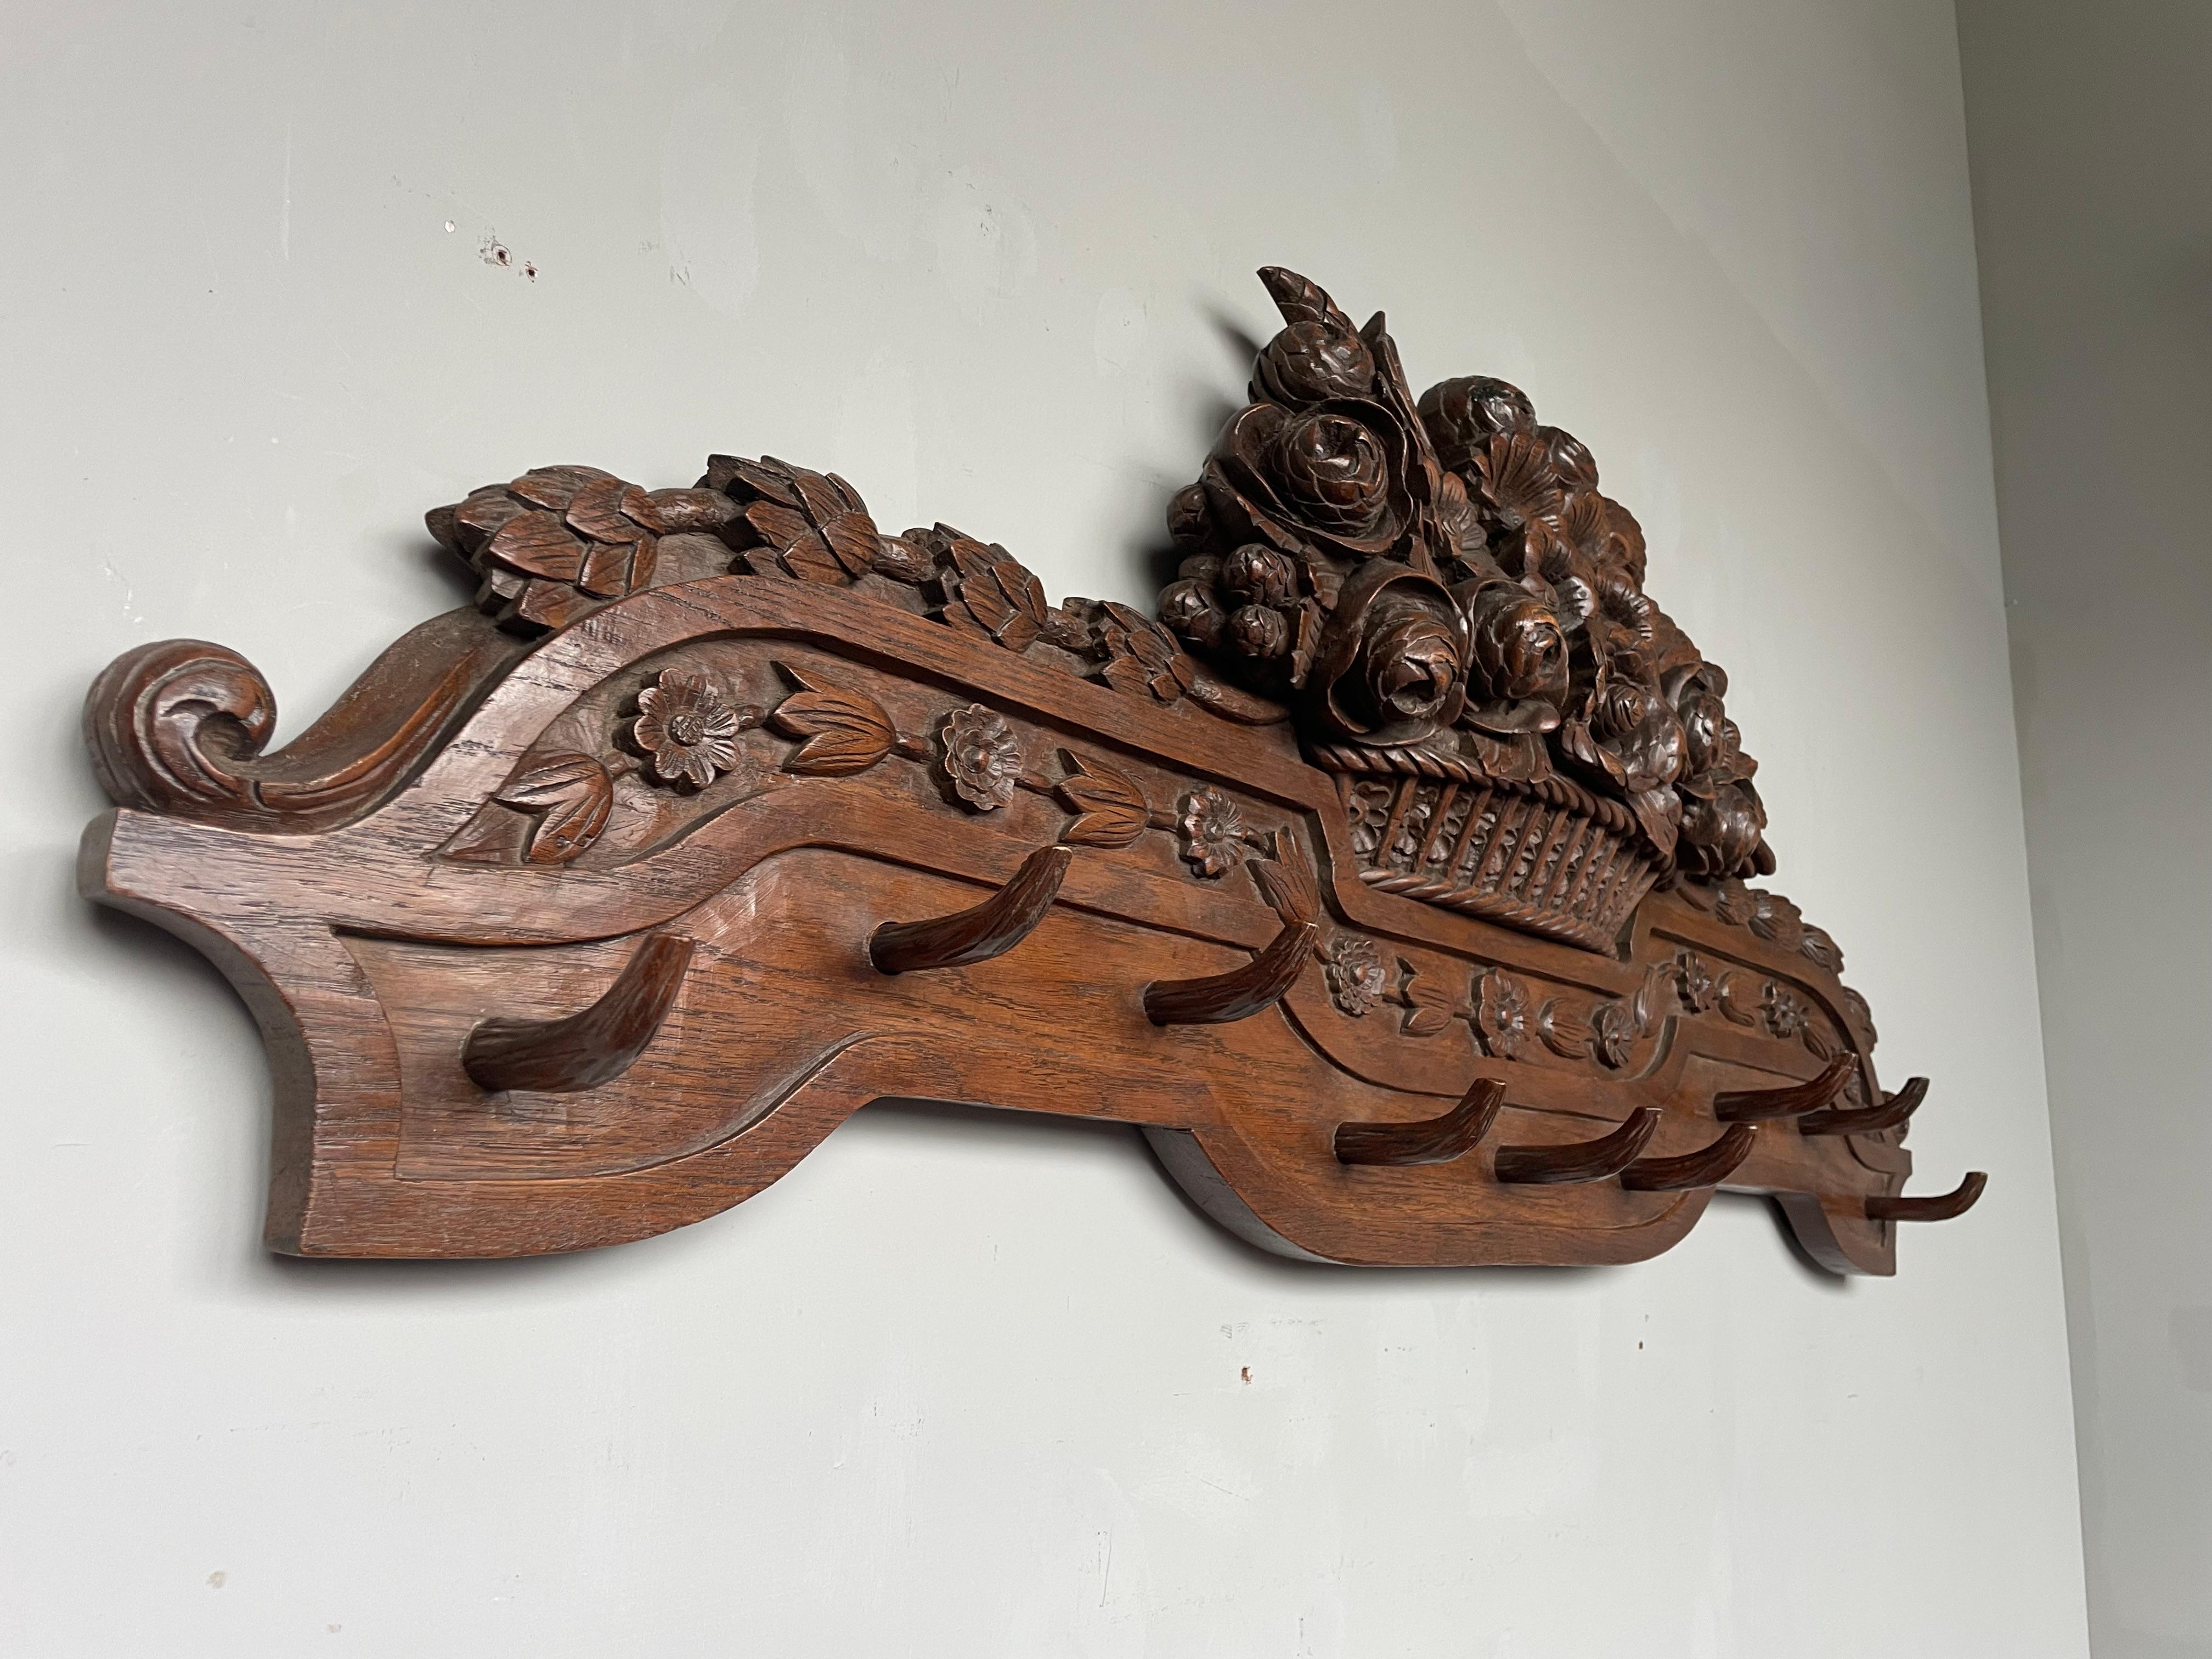 Rare, late 1800s, solid oak, handcarved, Black Forest wall coat rack.

Only very rarely will you come across an antique that is as good and original as this large size, work of art coat rack. All handcrafted in the late 1800s, a coat rack of this